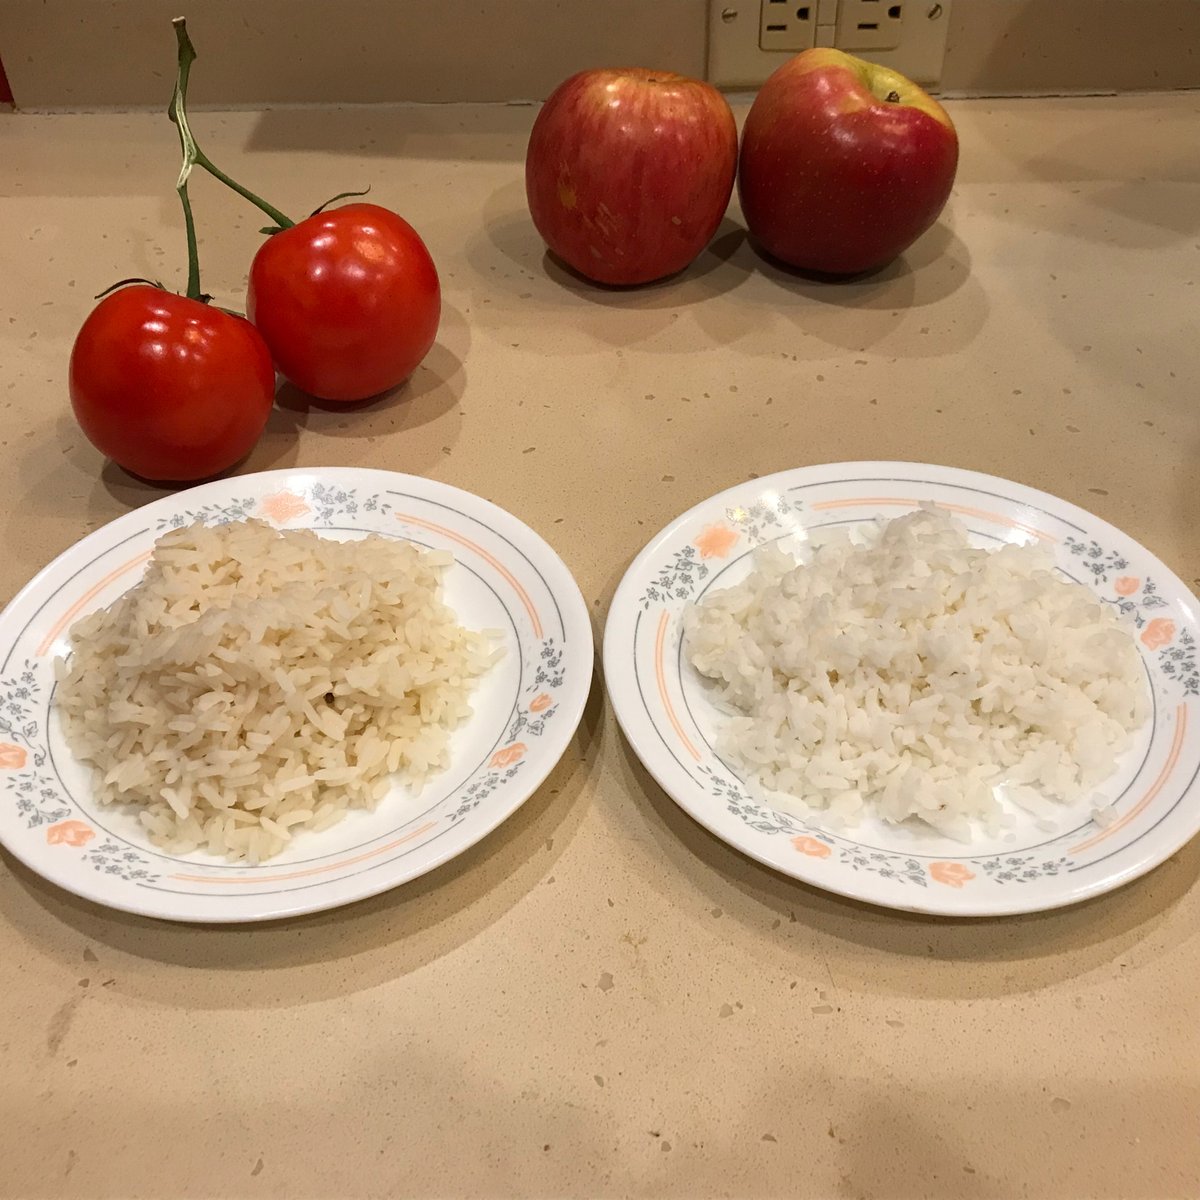 Healthy Eating: Rice 
#rice #chineseCuisine #ChineseFood #healthy #eatHealthy #mychinesehomekitchen